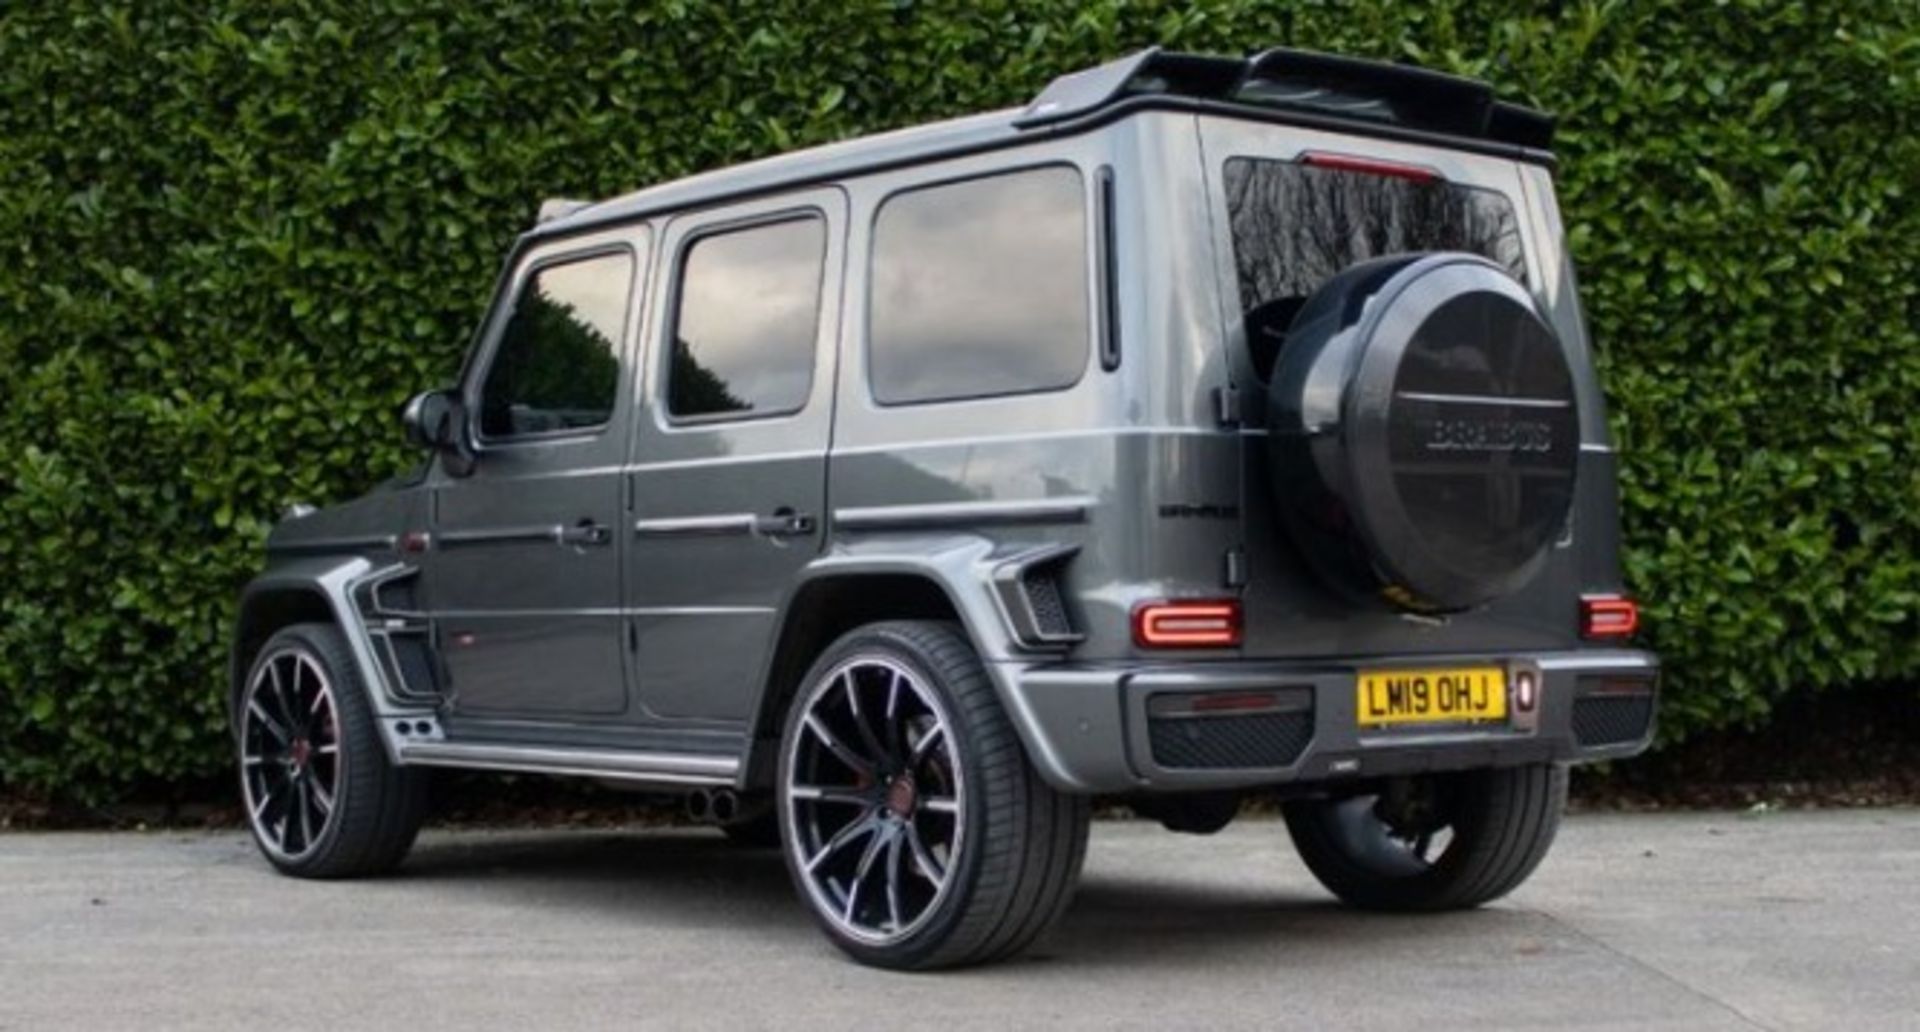 MERCEDES G63 BRABUS WIDE-STAR 800 STYLING GREY WITH BLACK LEATHER INTERIOR - Image 3 of 27